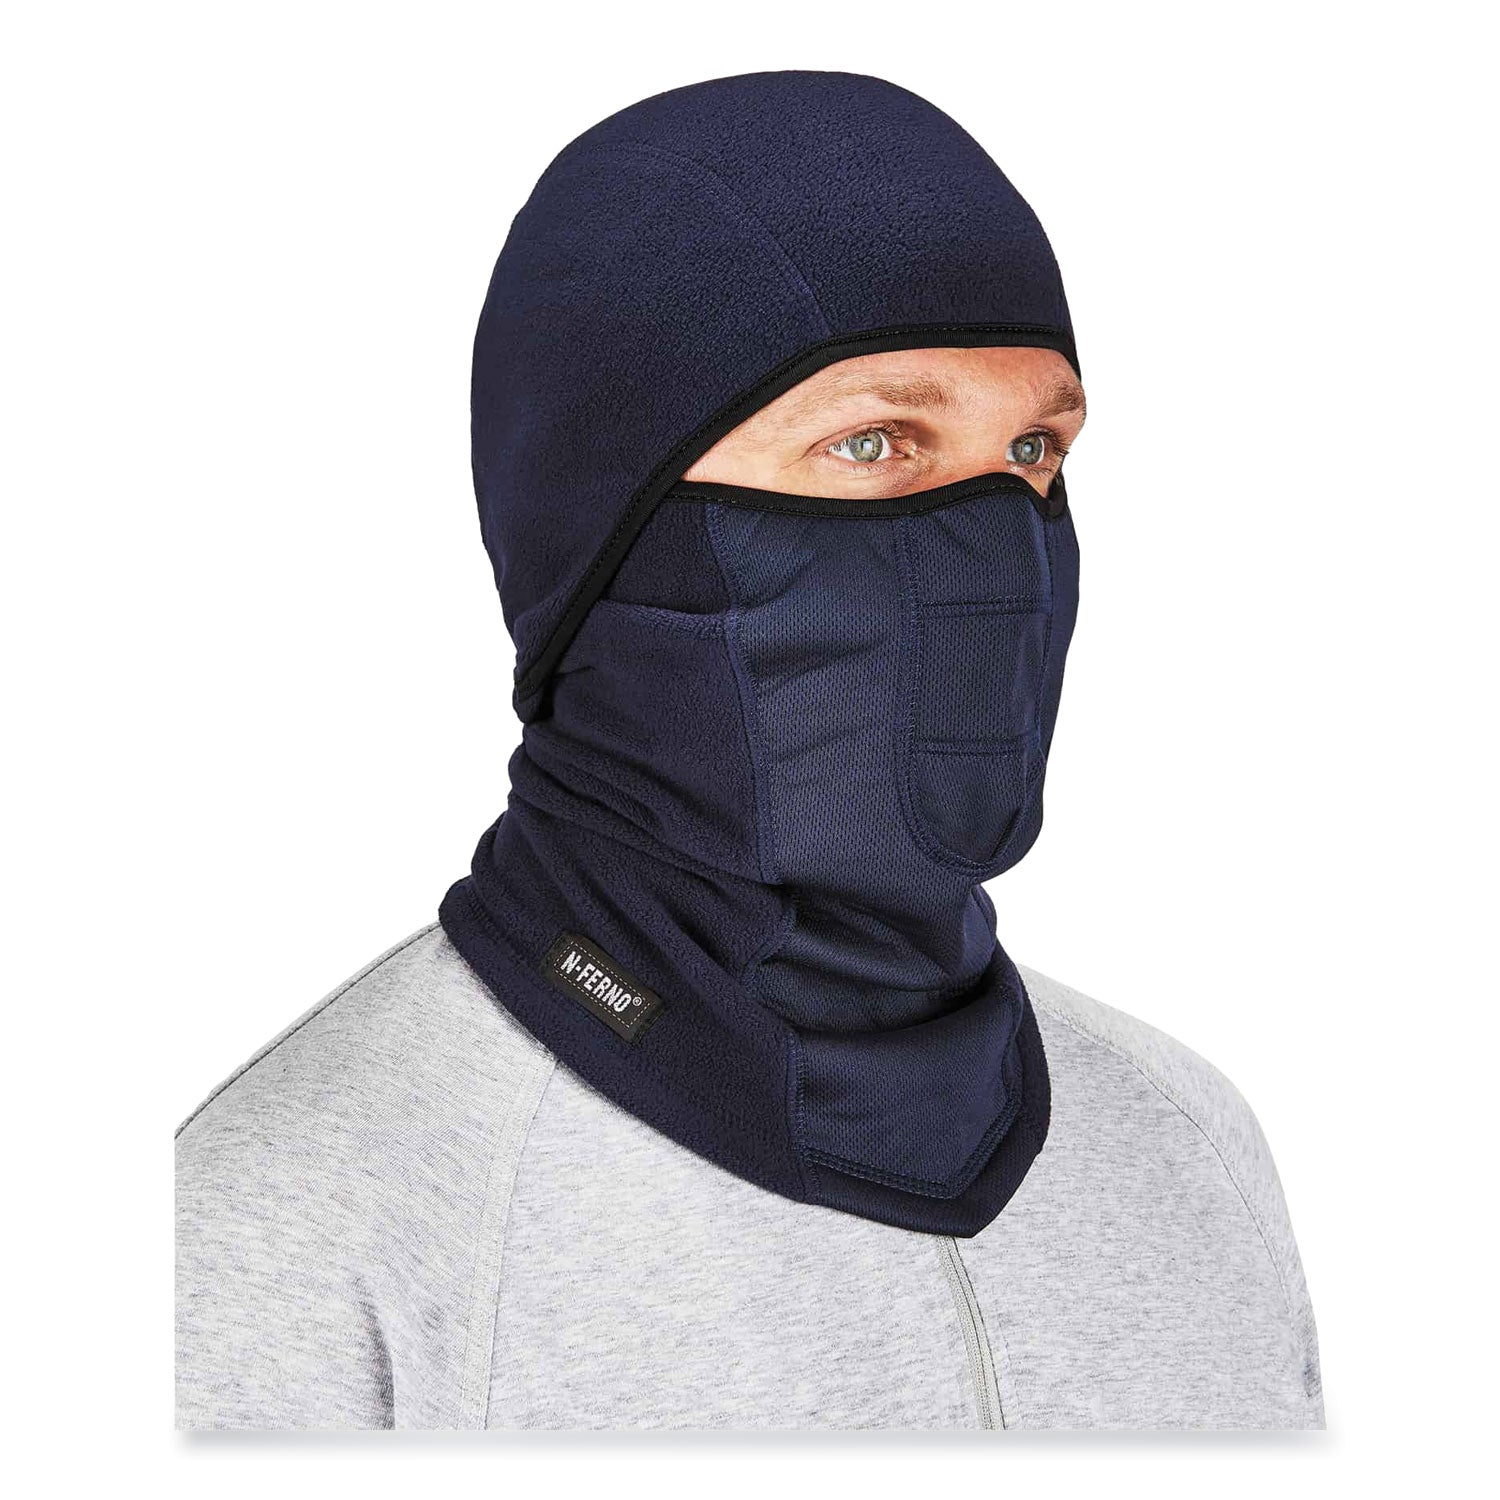 n-ferno-6823-hinged-balaclava-face-mask-fleece-one-size-fits-most-navy-ships-in-1-3-business-days_ego16851 - 8